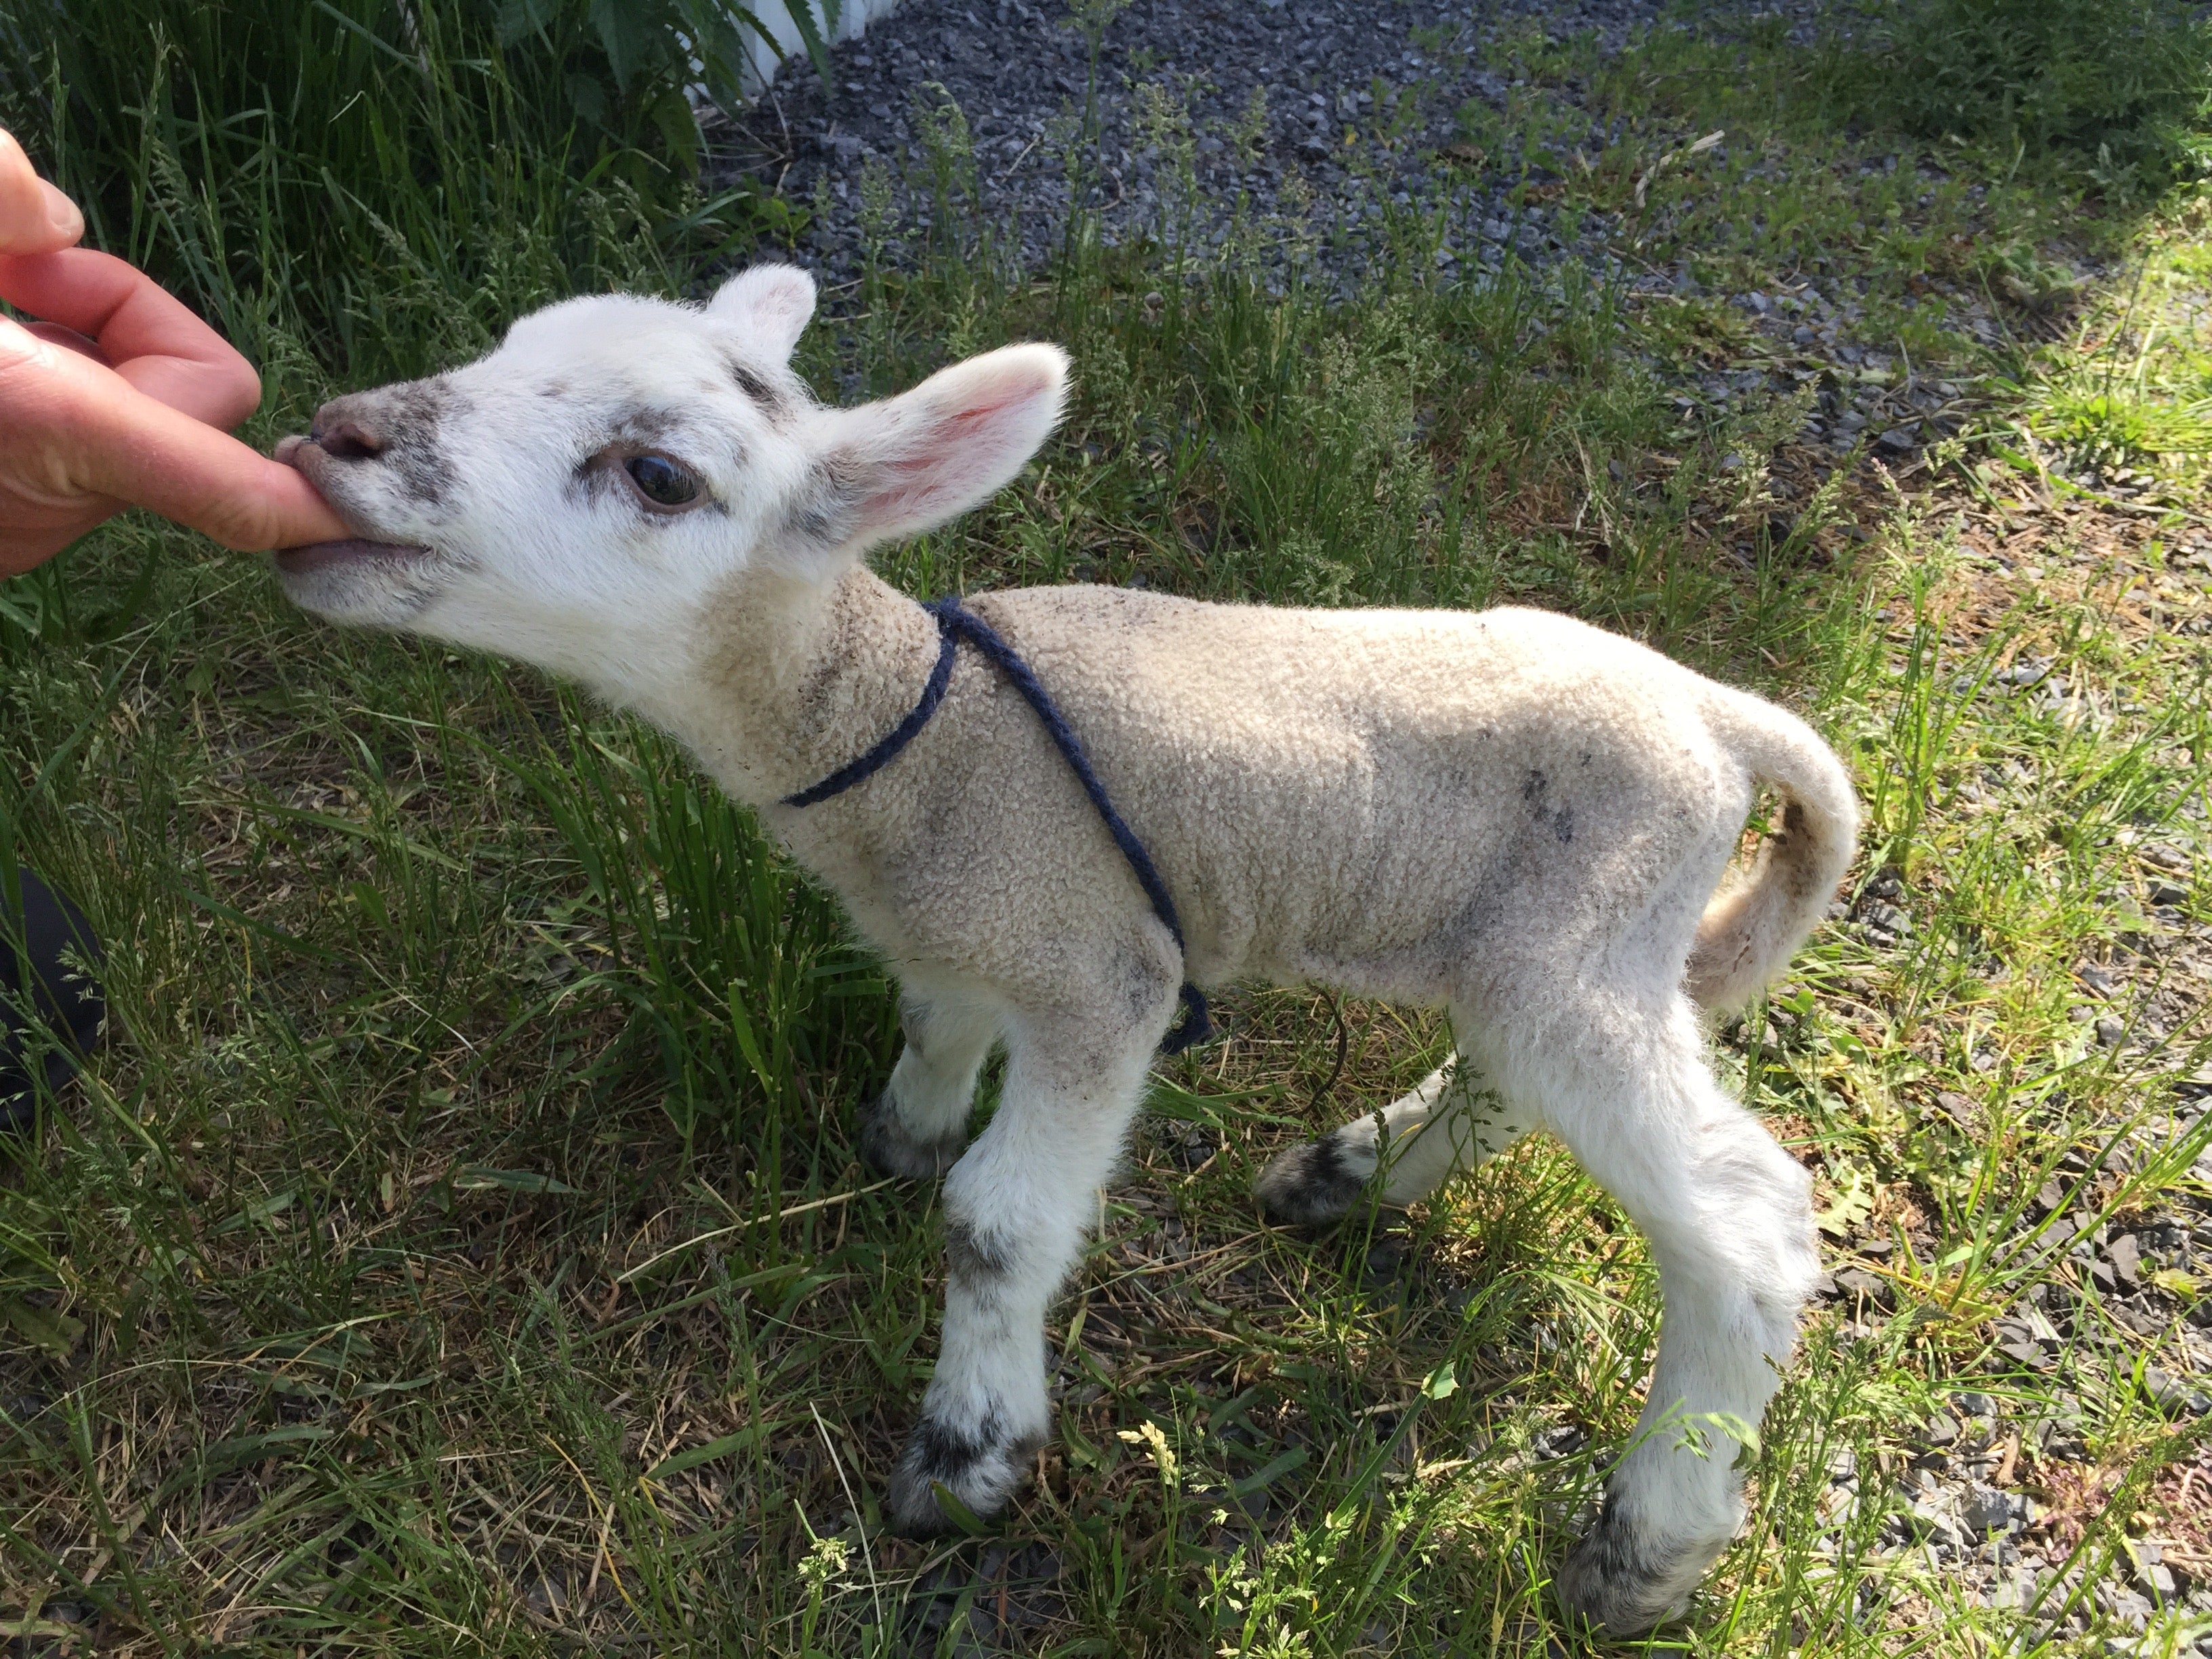 Small white lamb with speckled face sucking on a person's finger at Topsy Farms